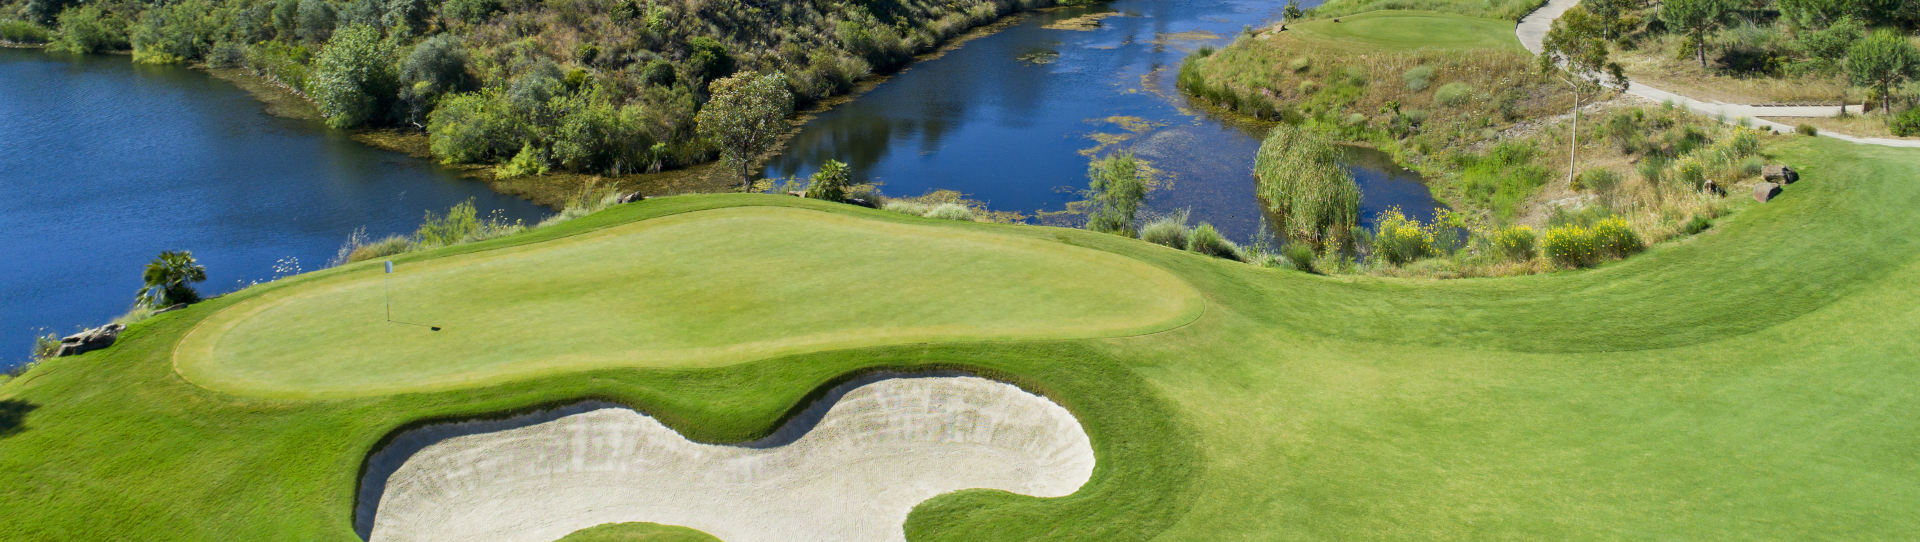 Portugal golf holidays - Monte Rei Golf Duo Experience - Photo 1